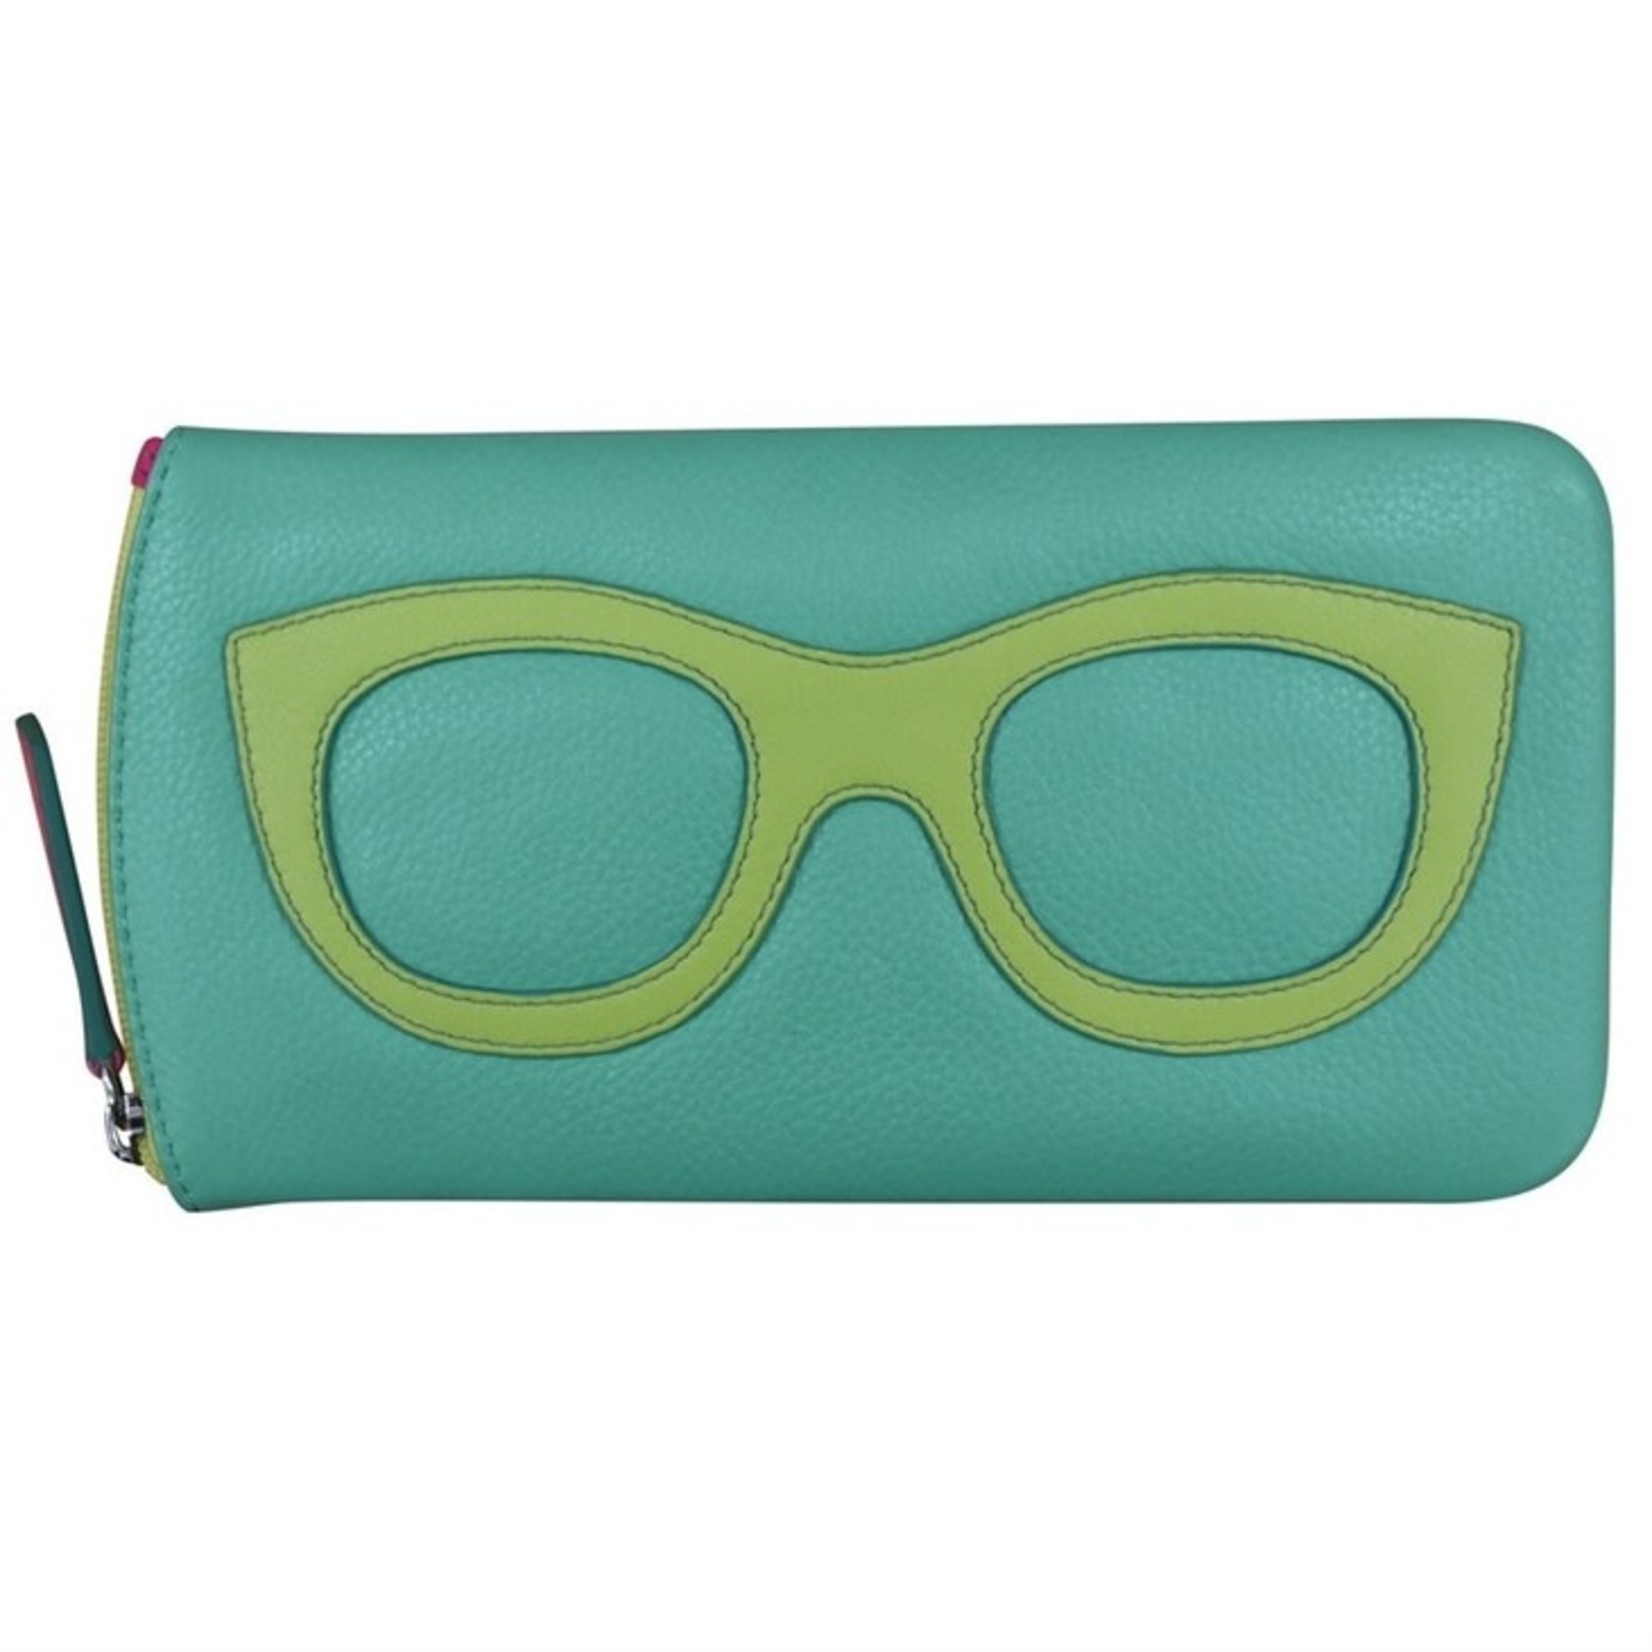 Leather Handbags and Accessories 6462 Turquoise/Leaf/Indian Pink - Leather Eyeglass Case